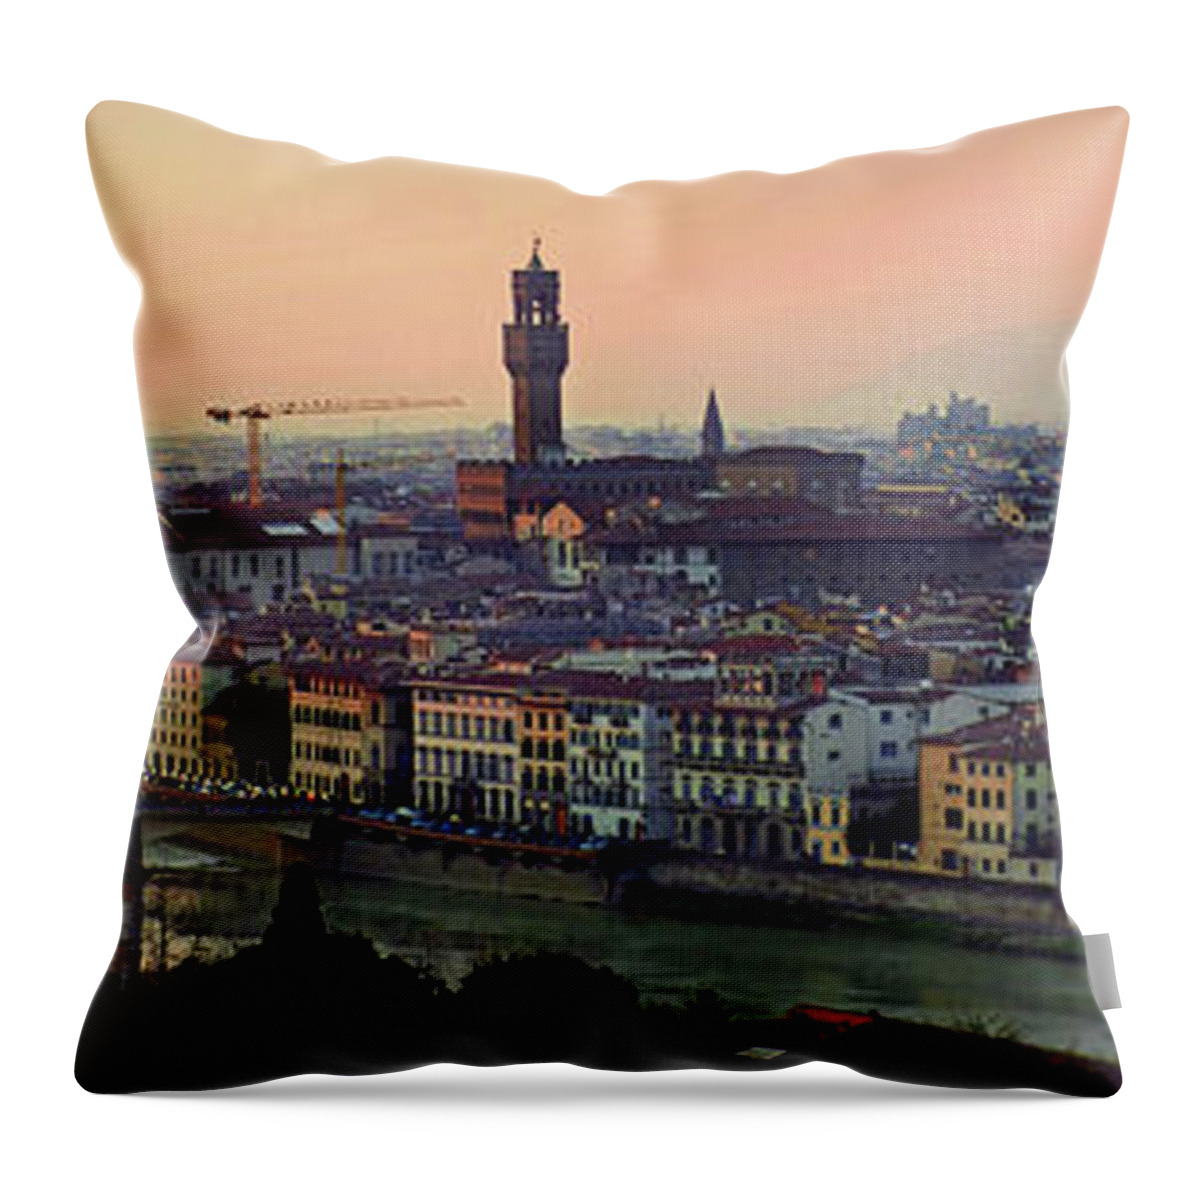 Tranquility Throw Pillow featuring the photograph Firenze Florence by Fabio Cataldo ©